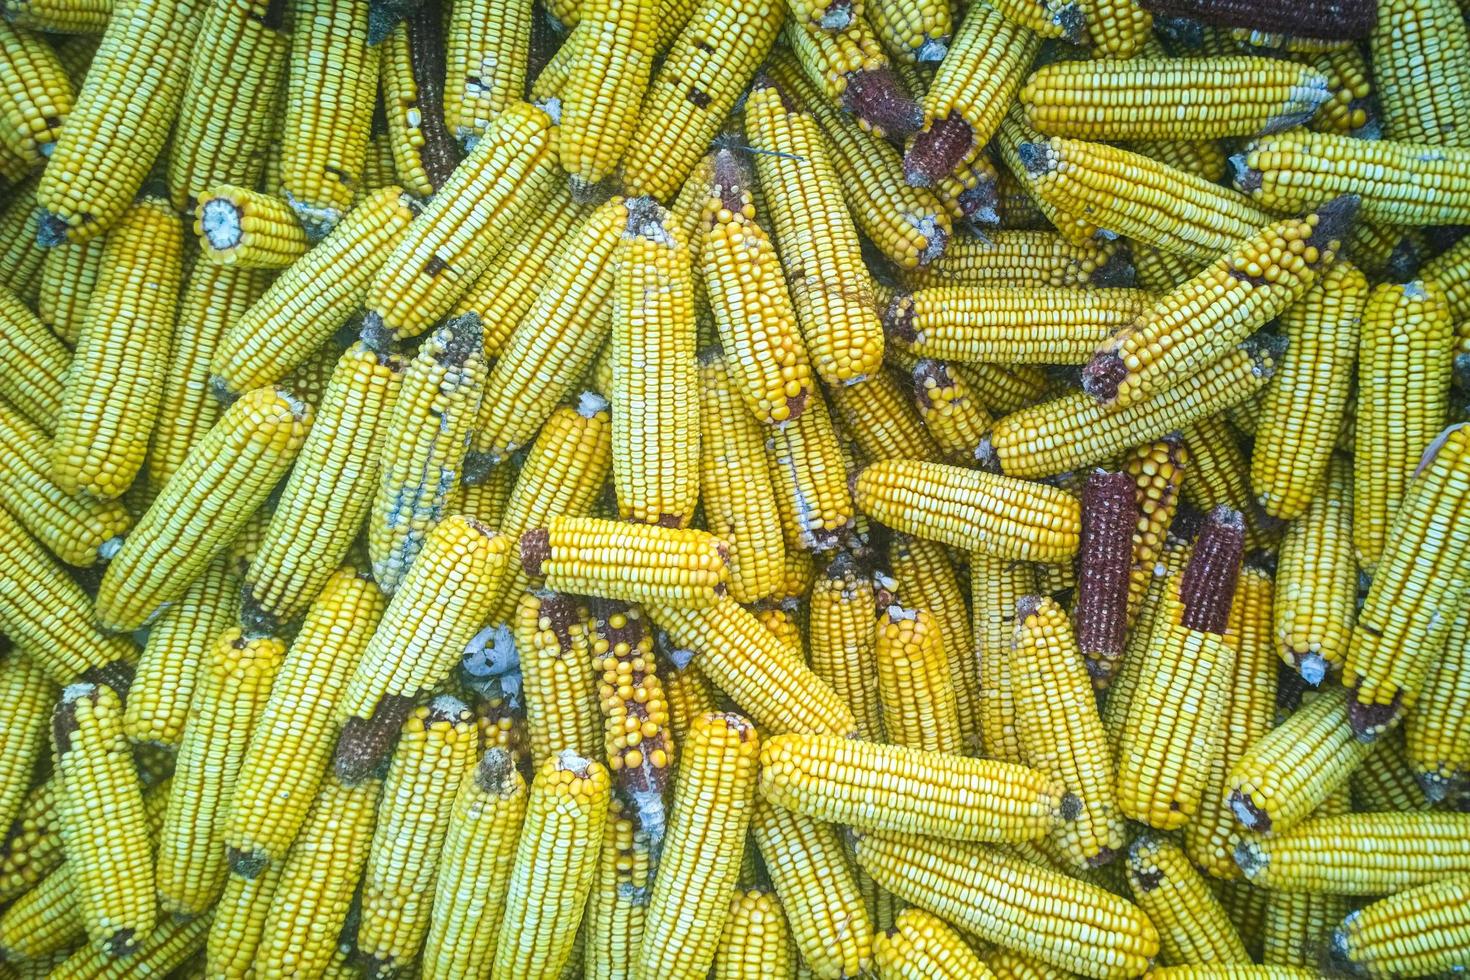 Many corn cobs accumulated photo